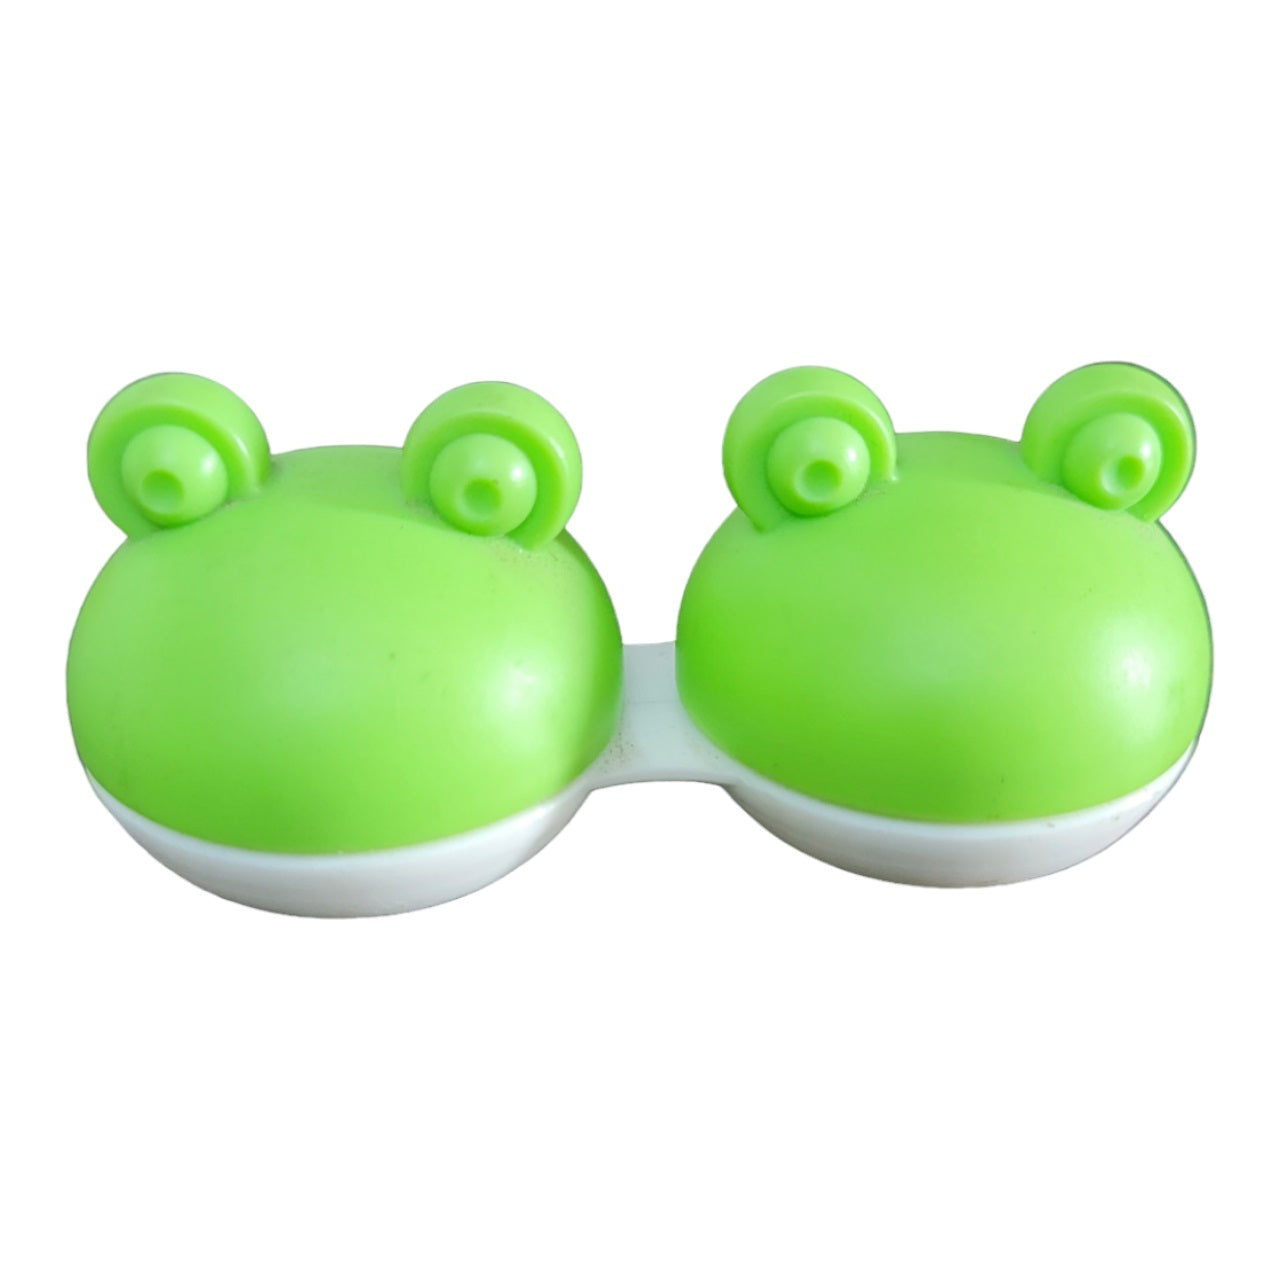 Frog Contact Lens Case | Fancy Contact Lenses Case Green Color by Affaires Qcase-0046